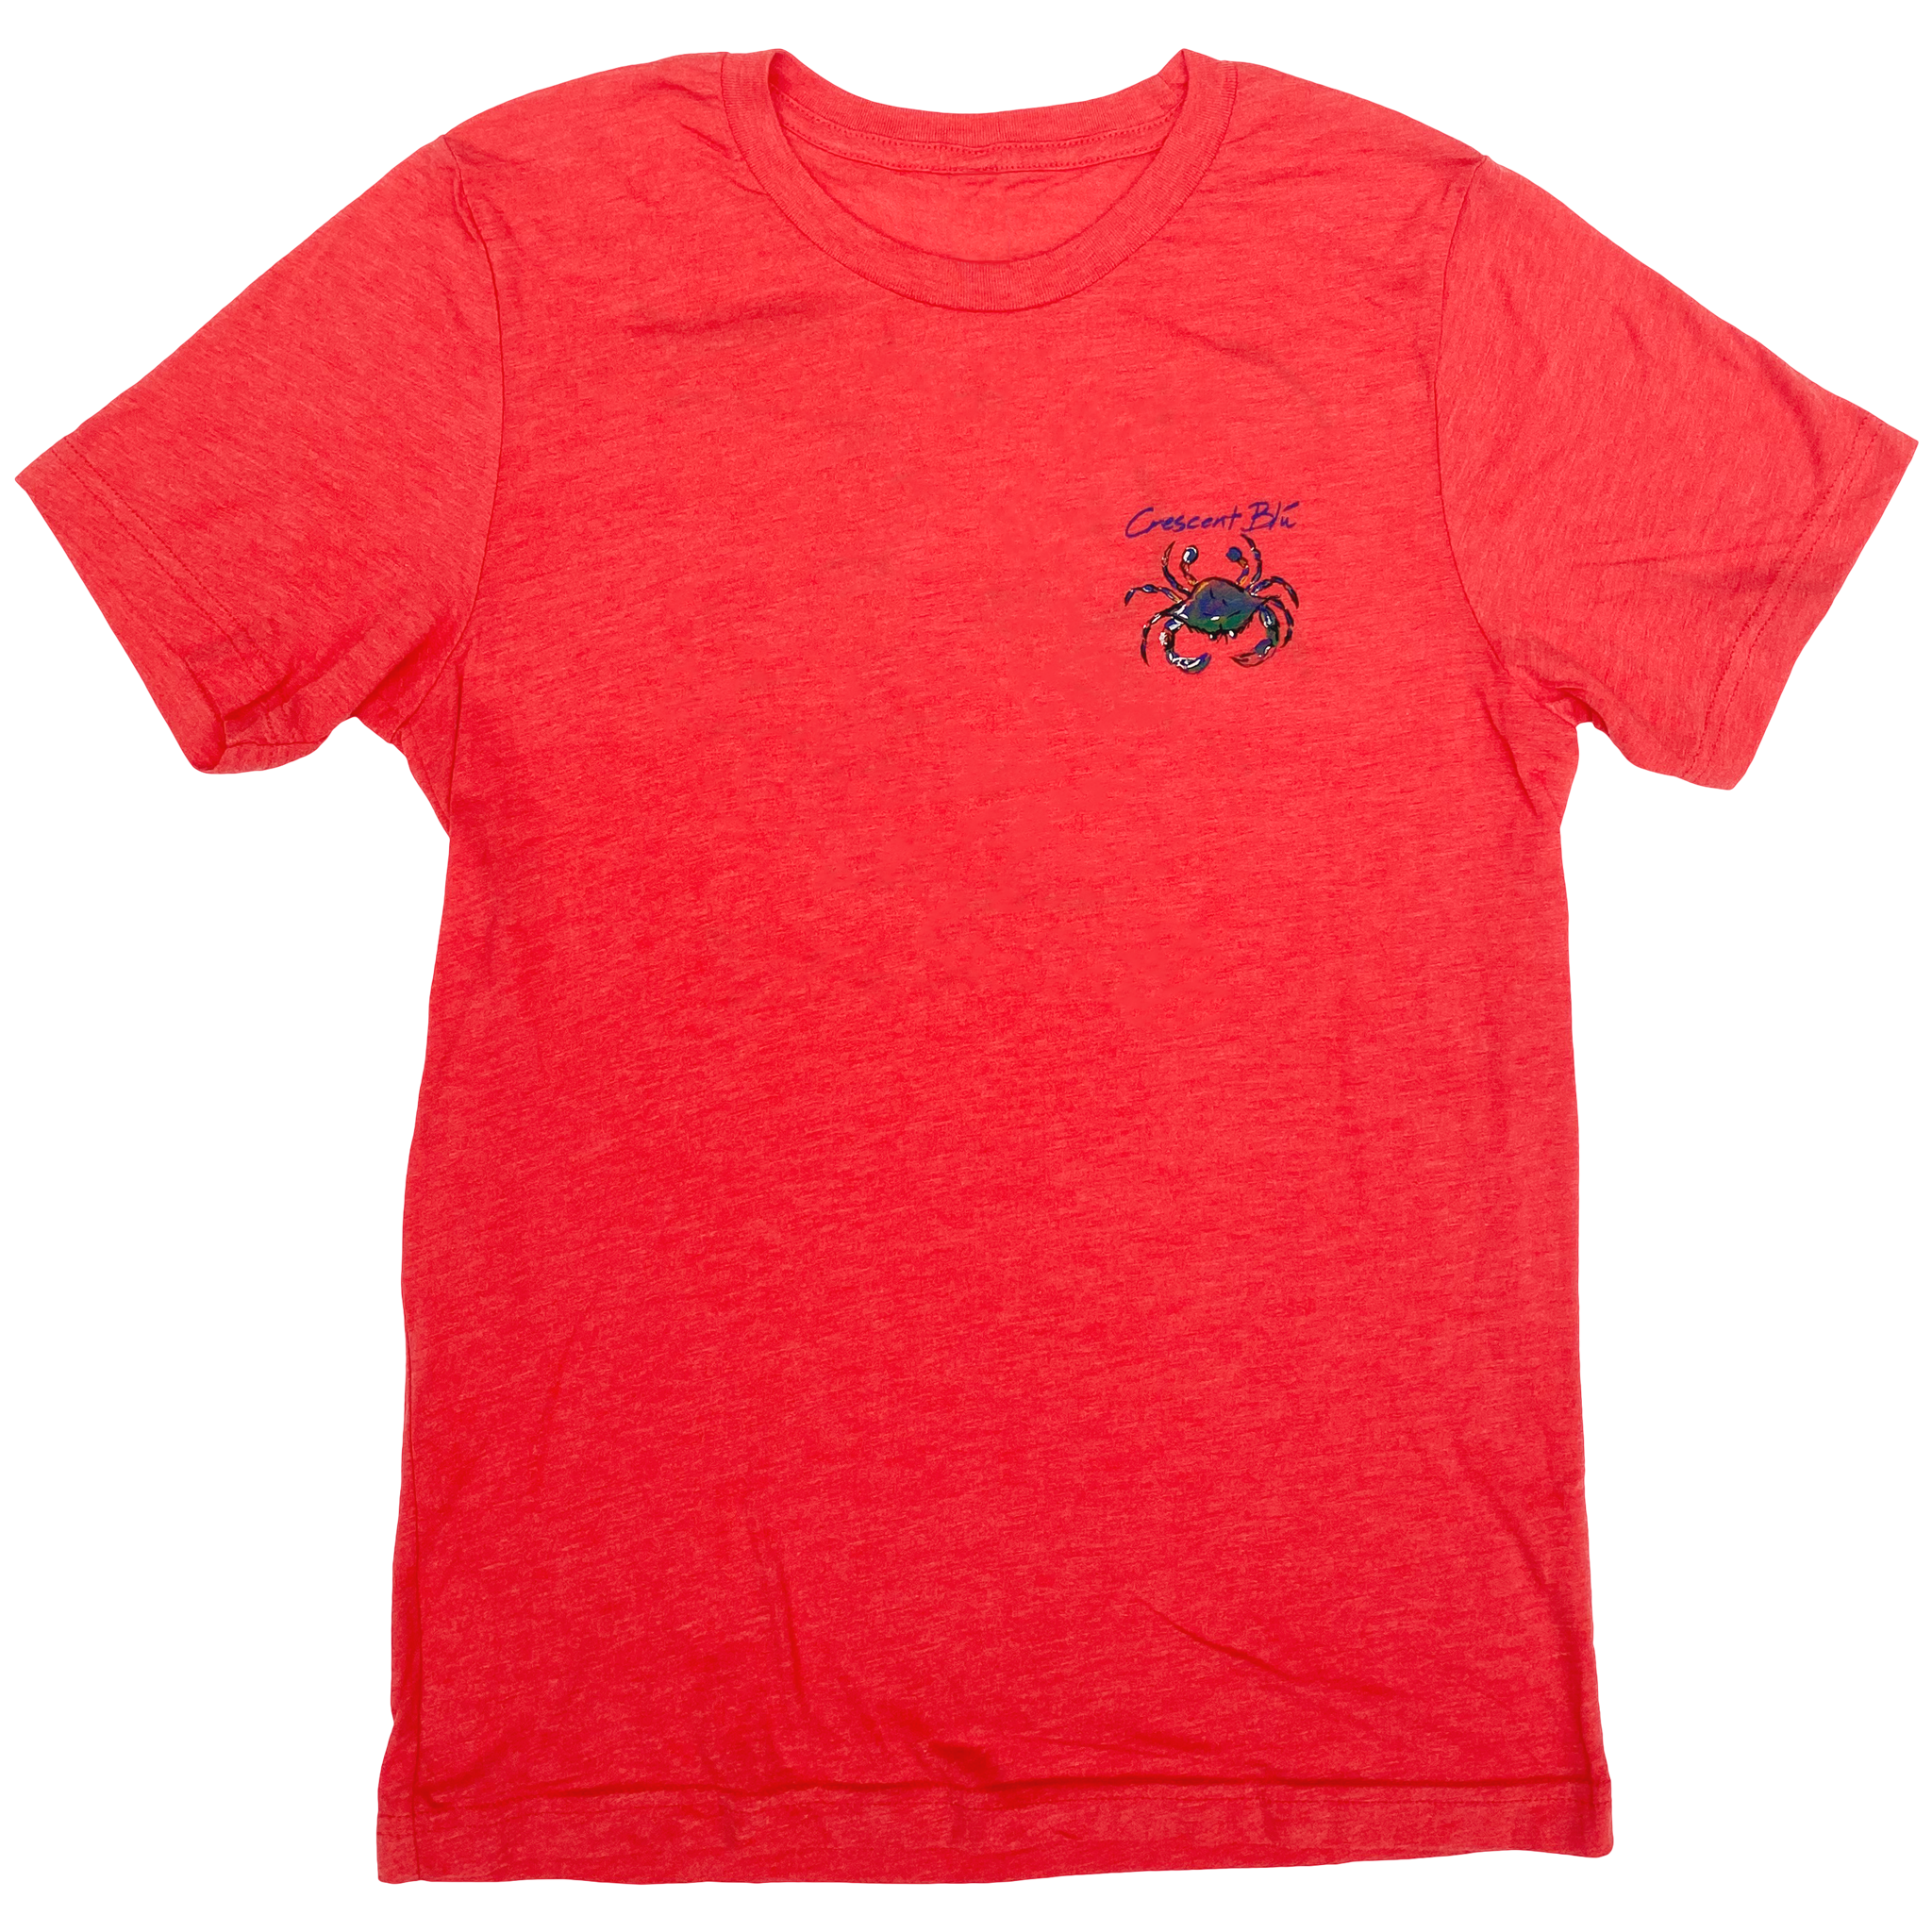 Adult short sleeve Crescent Blu tee with multi-colored crab logo on front left chest